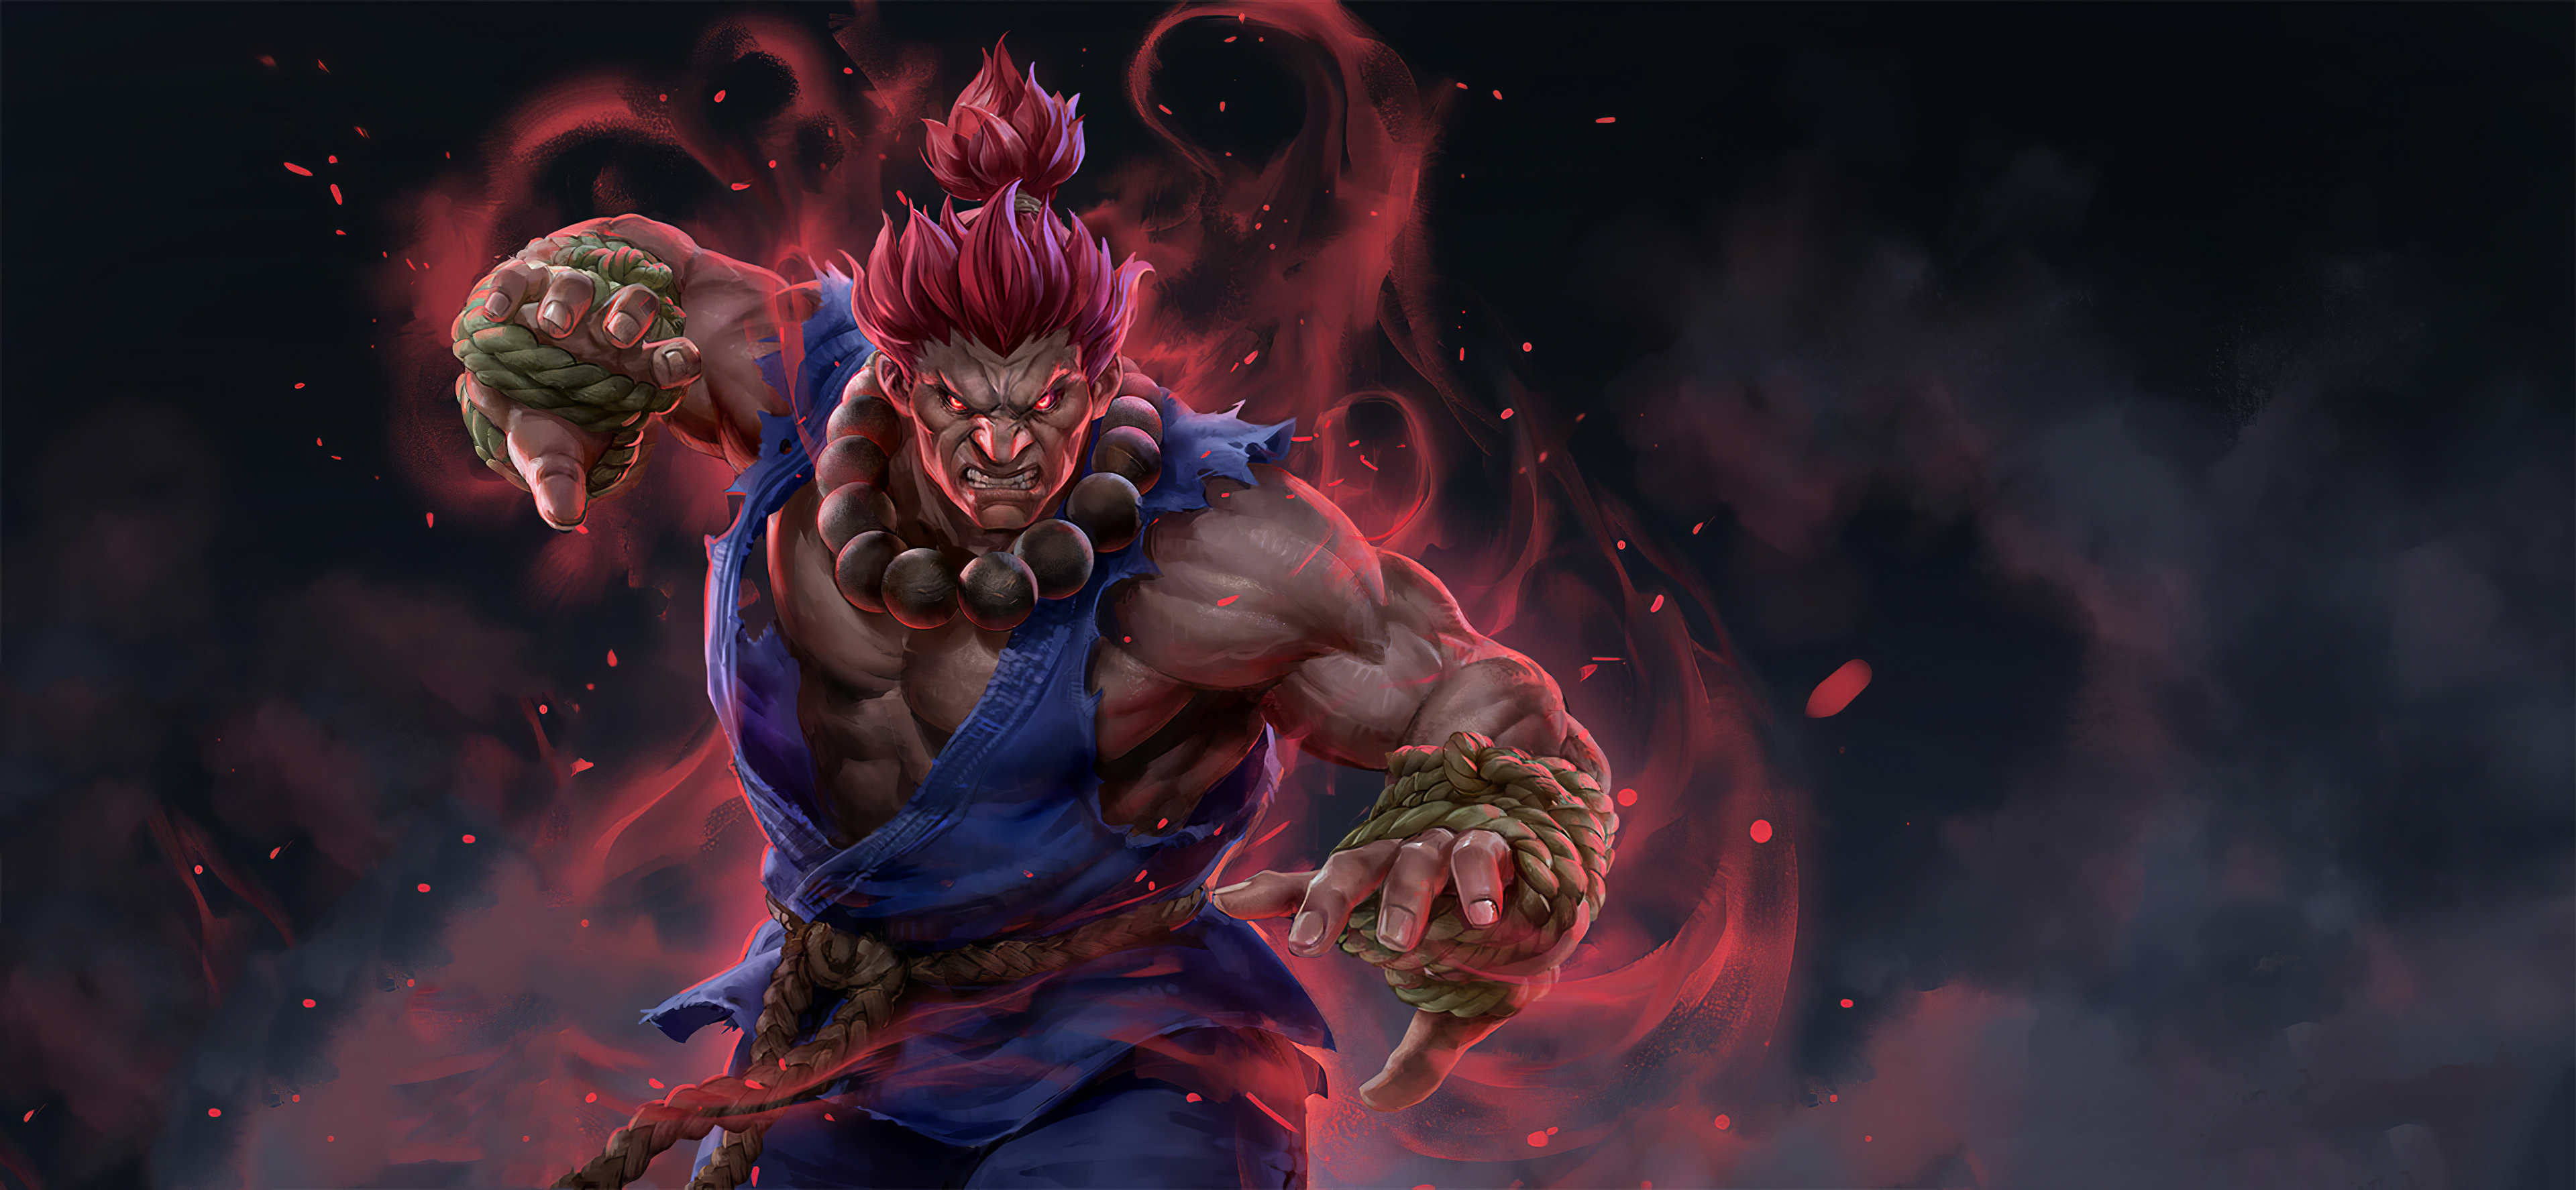 Akuma Artwork Street Fighter Wallpaper Hd Games 4k Wallpapers Images Photos And Background